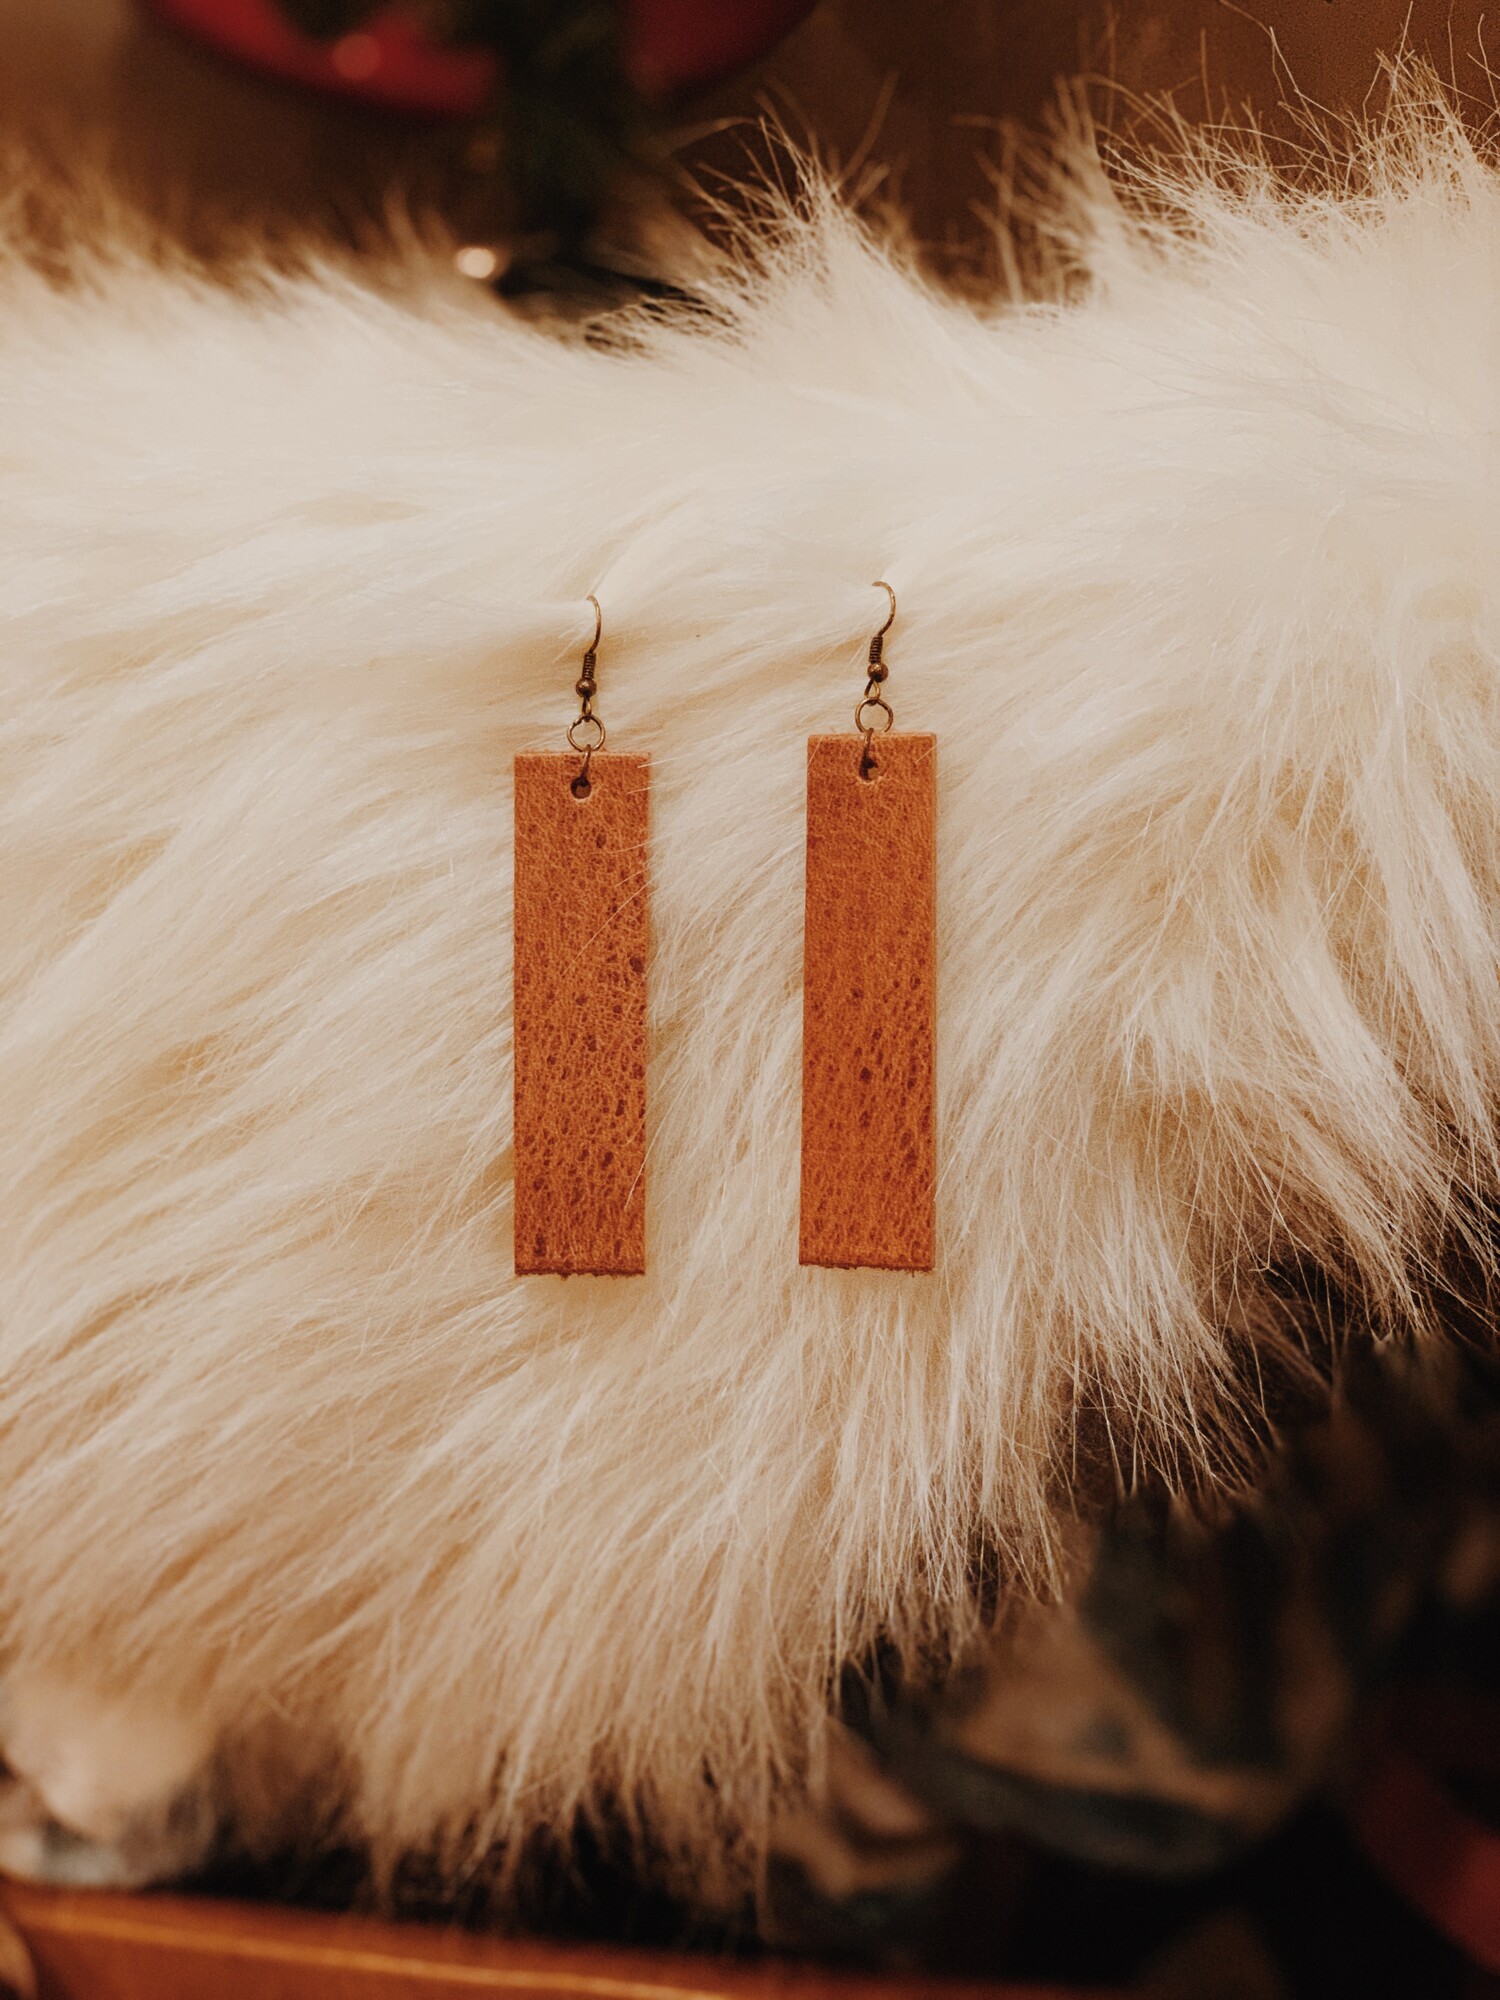 These genuine leather earrings from The Olive Branch were carefully designed and hand crafted! They measure 4 inches long.